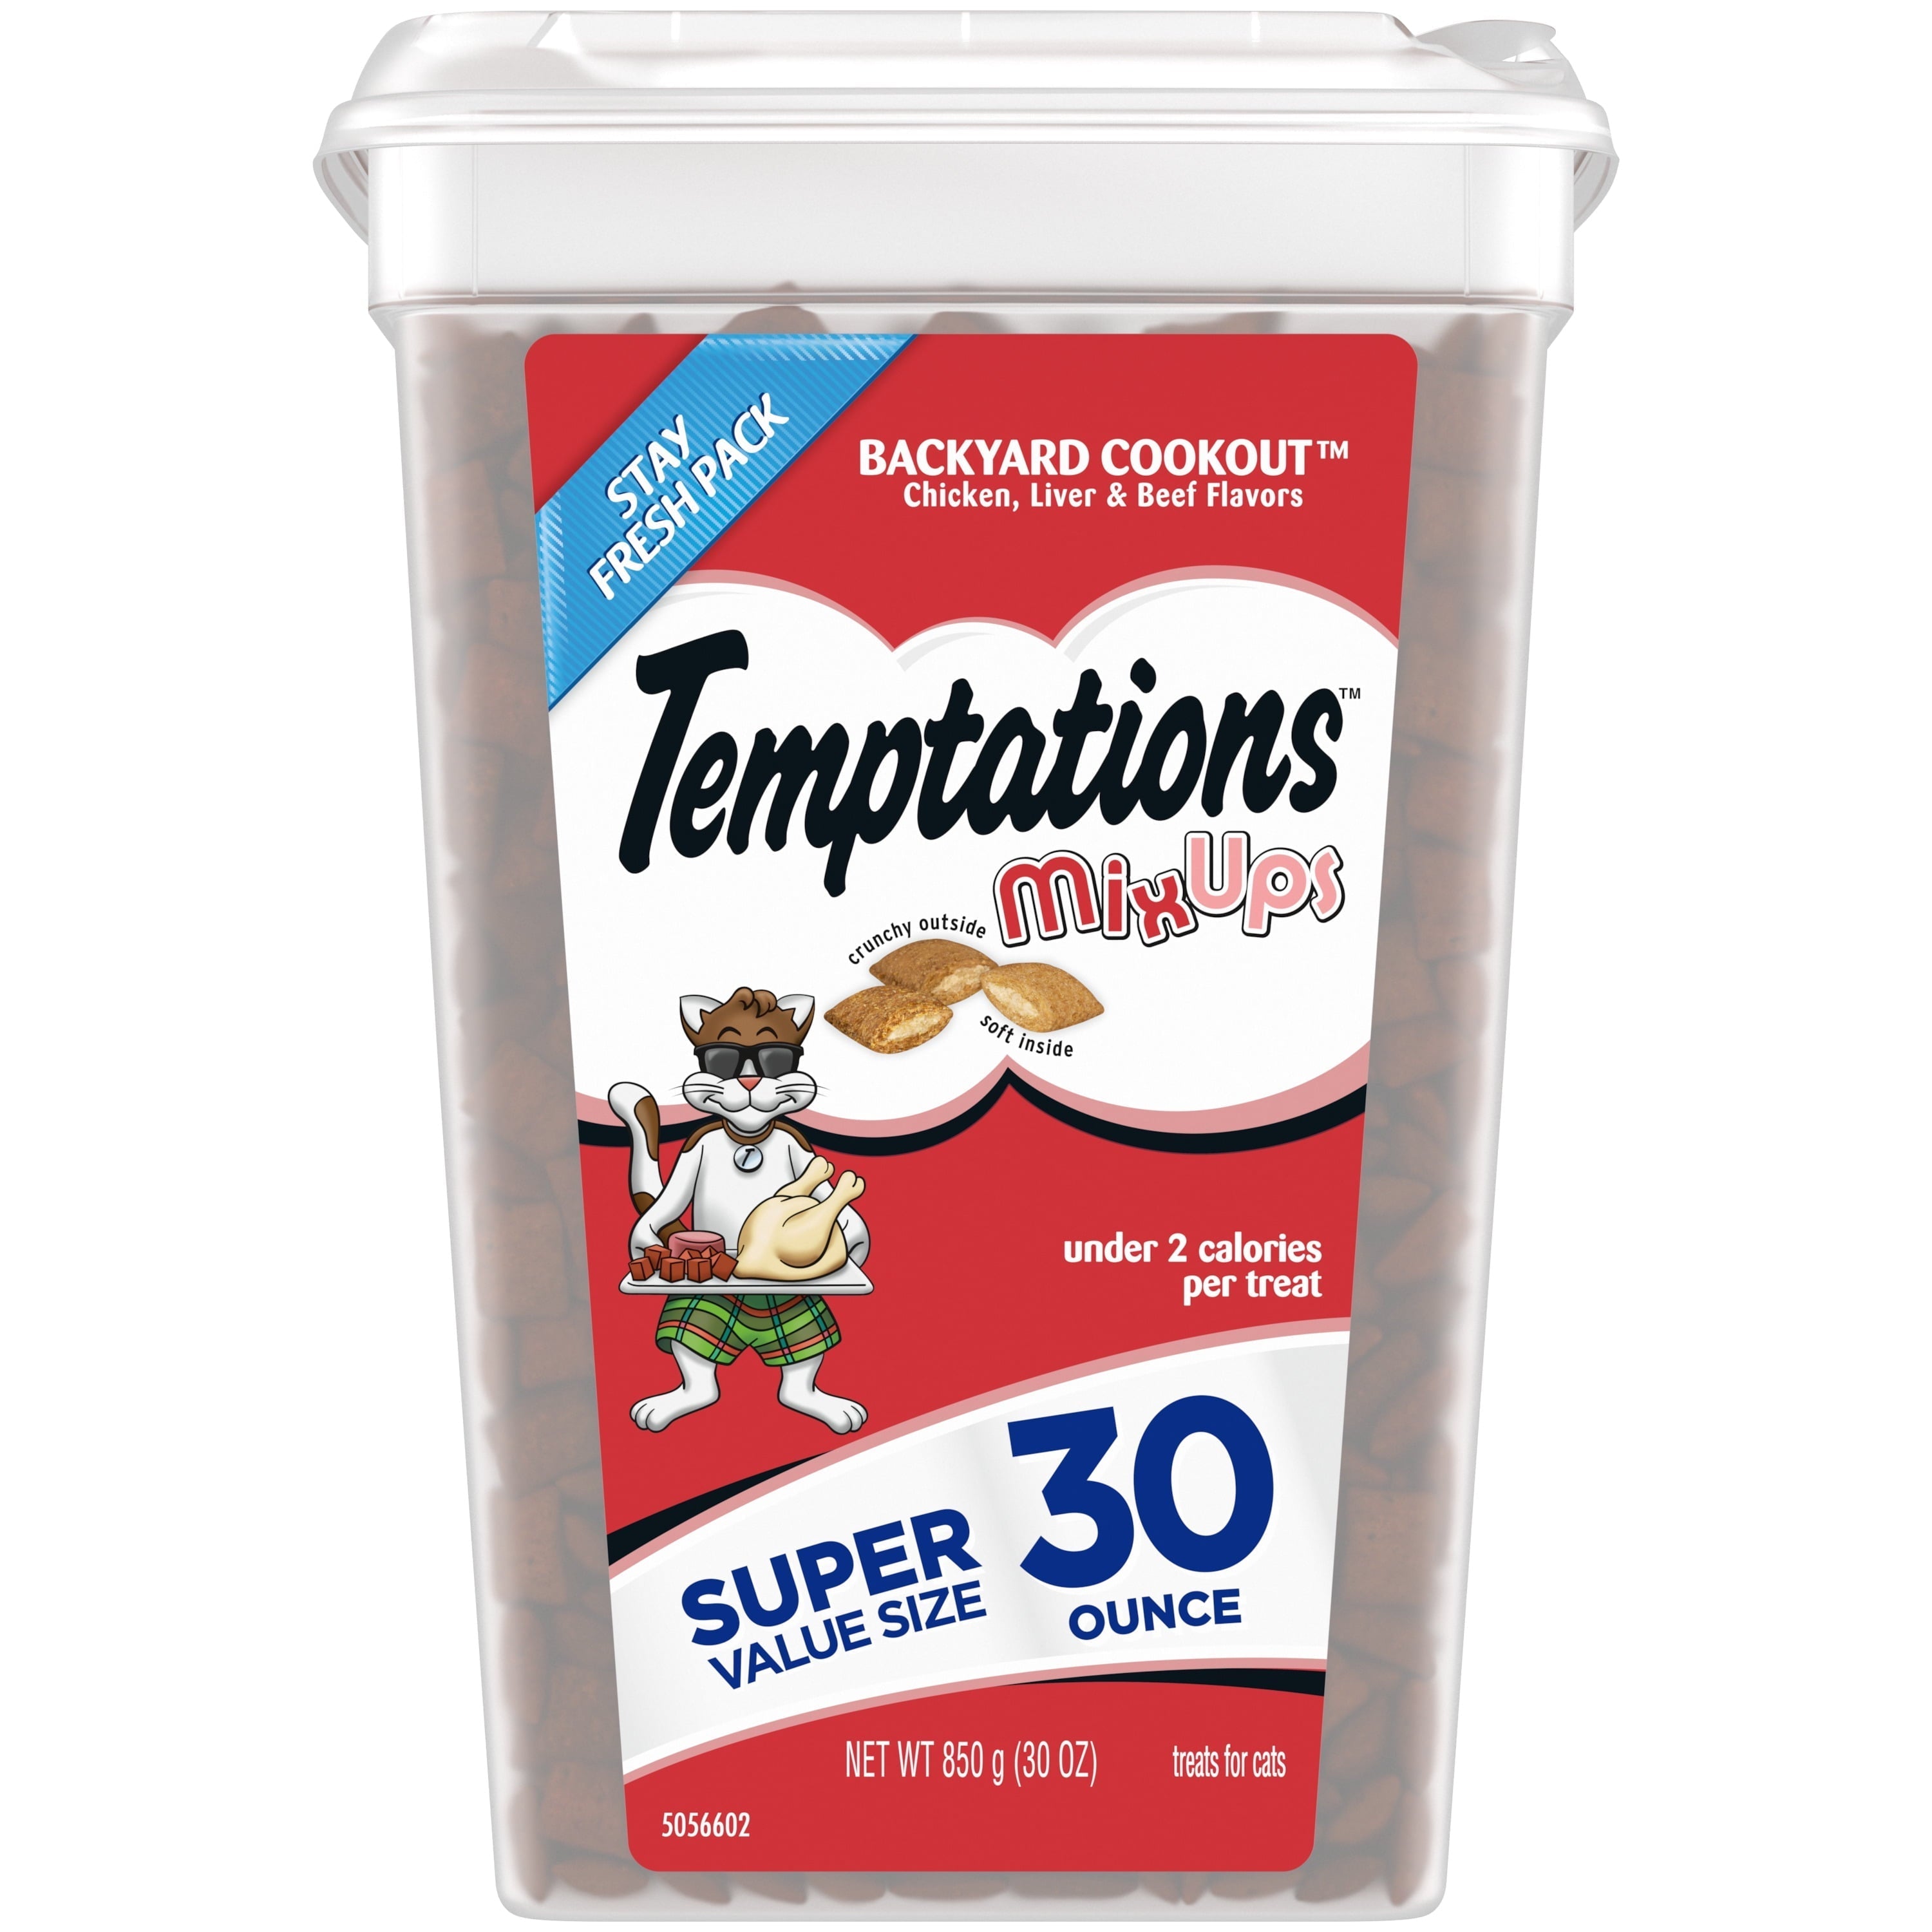 Wholesale prices with free shipping all over United States Temptations Mixups Crunchy and Soft Cat Treats Backyard Cookout Flavor, 30 oz. Tub - Steven Deals